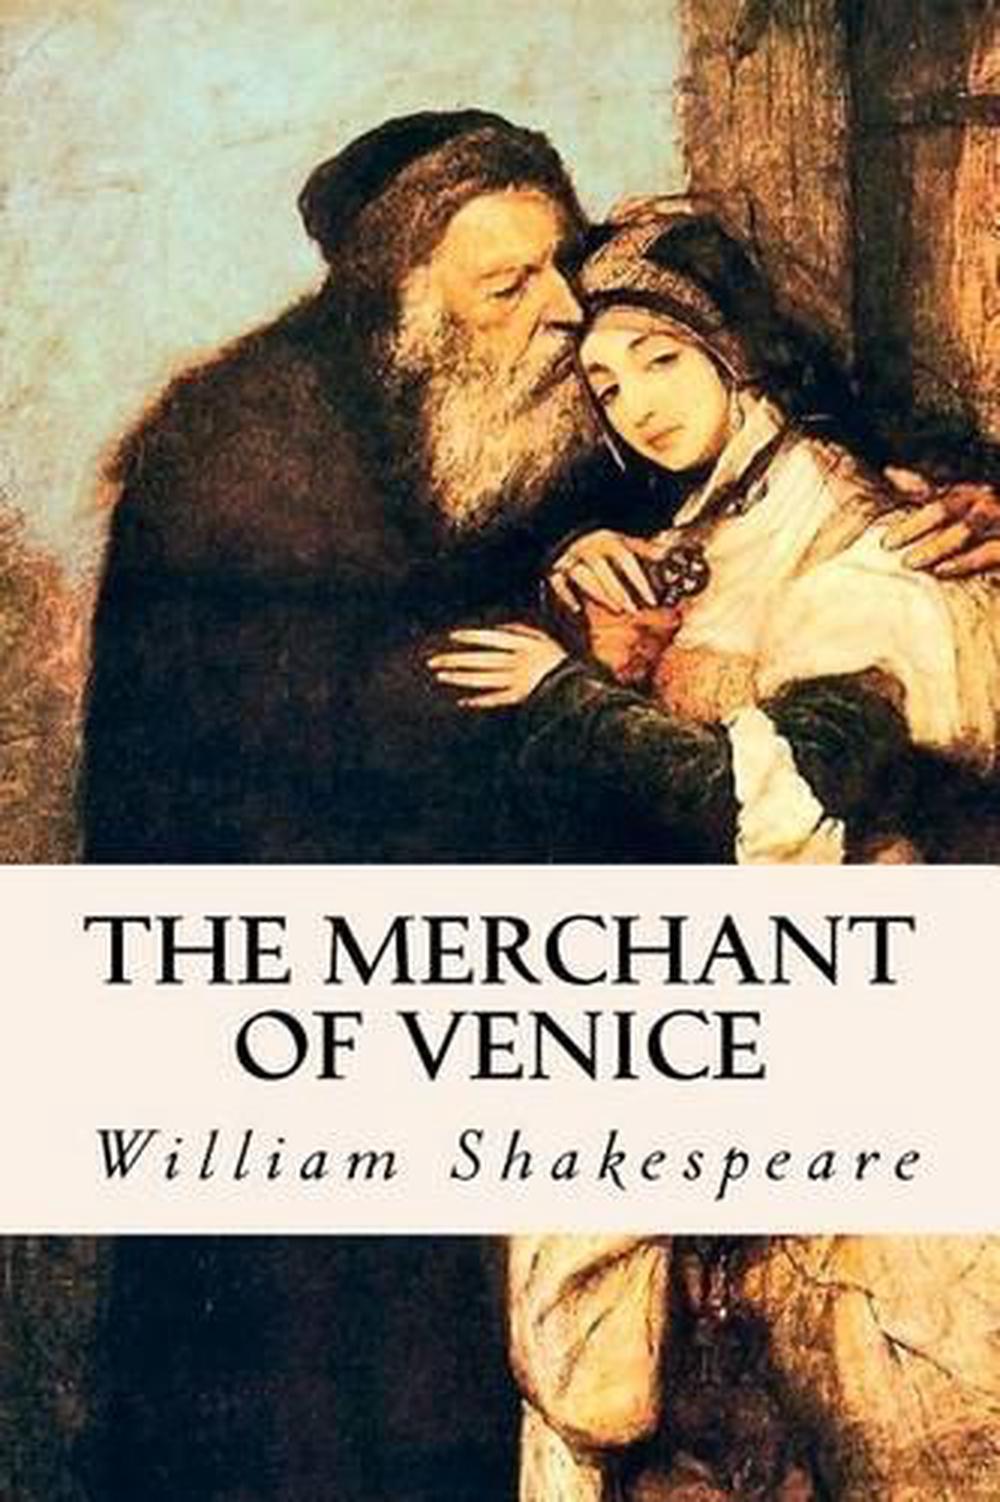 write a book review on merchant of venice